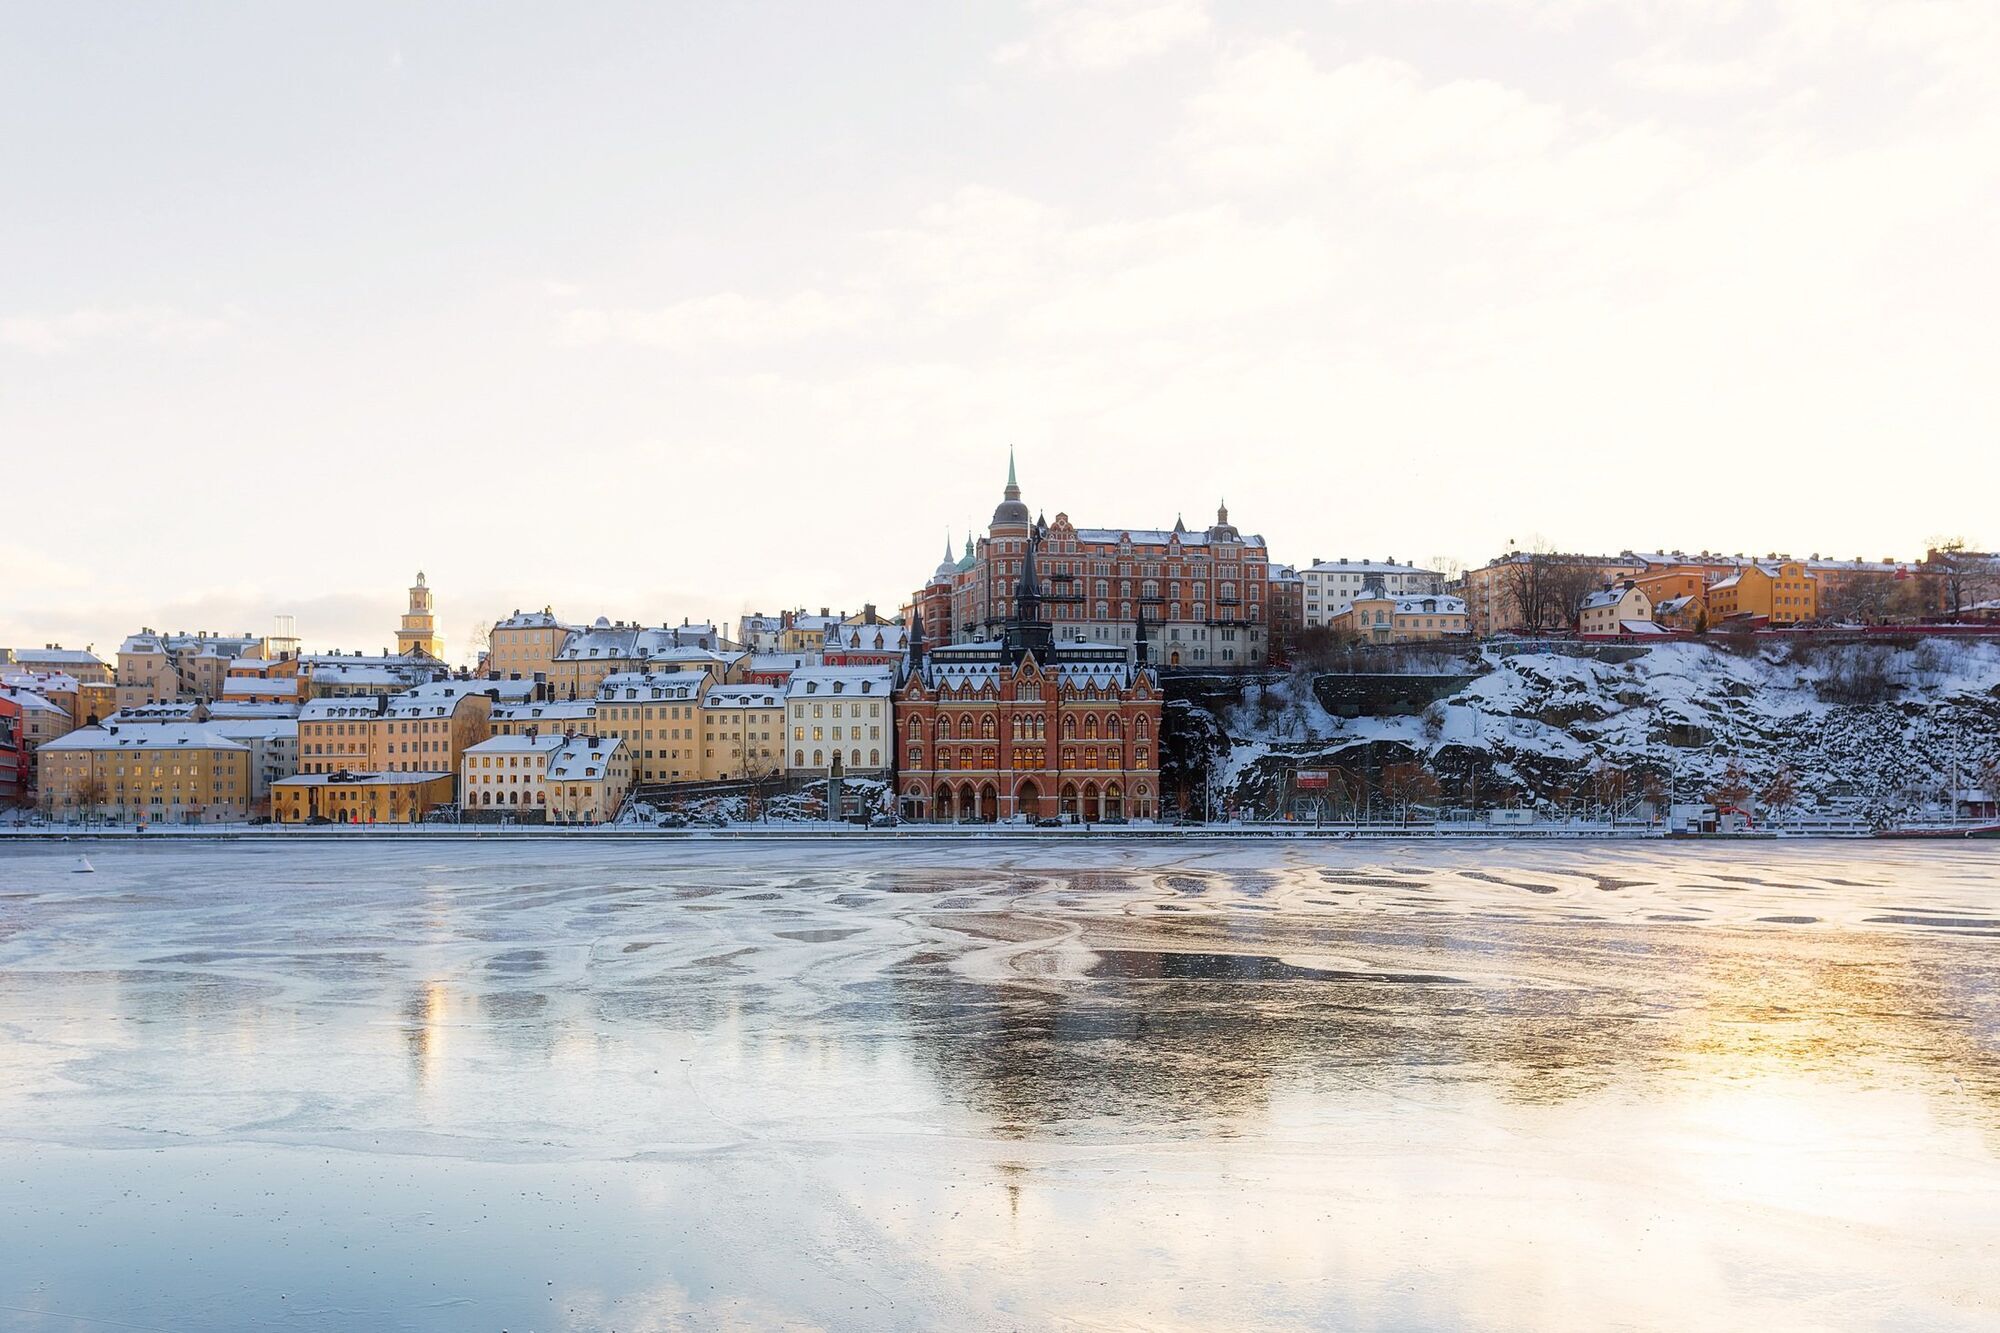 Stockholm surprises with its special beauty in winter